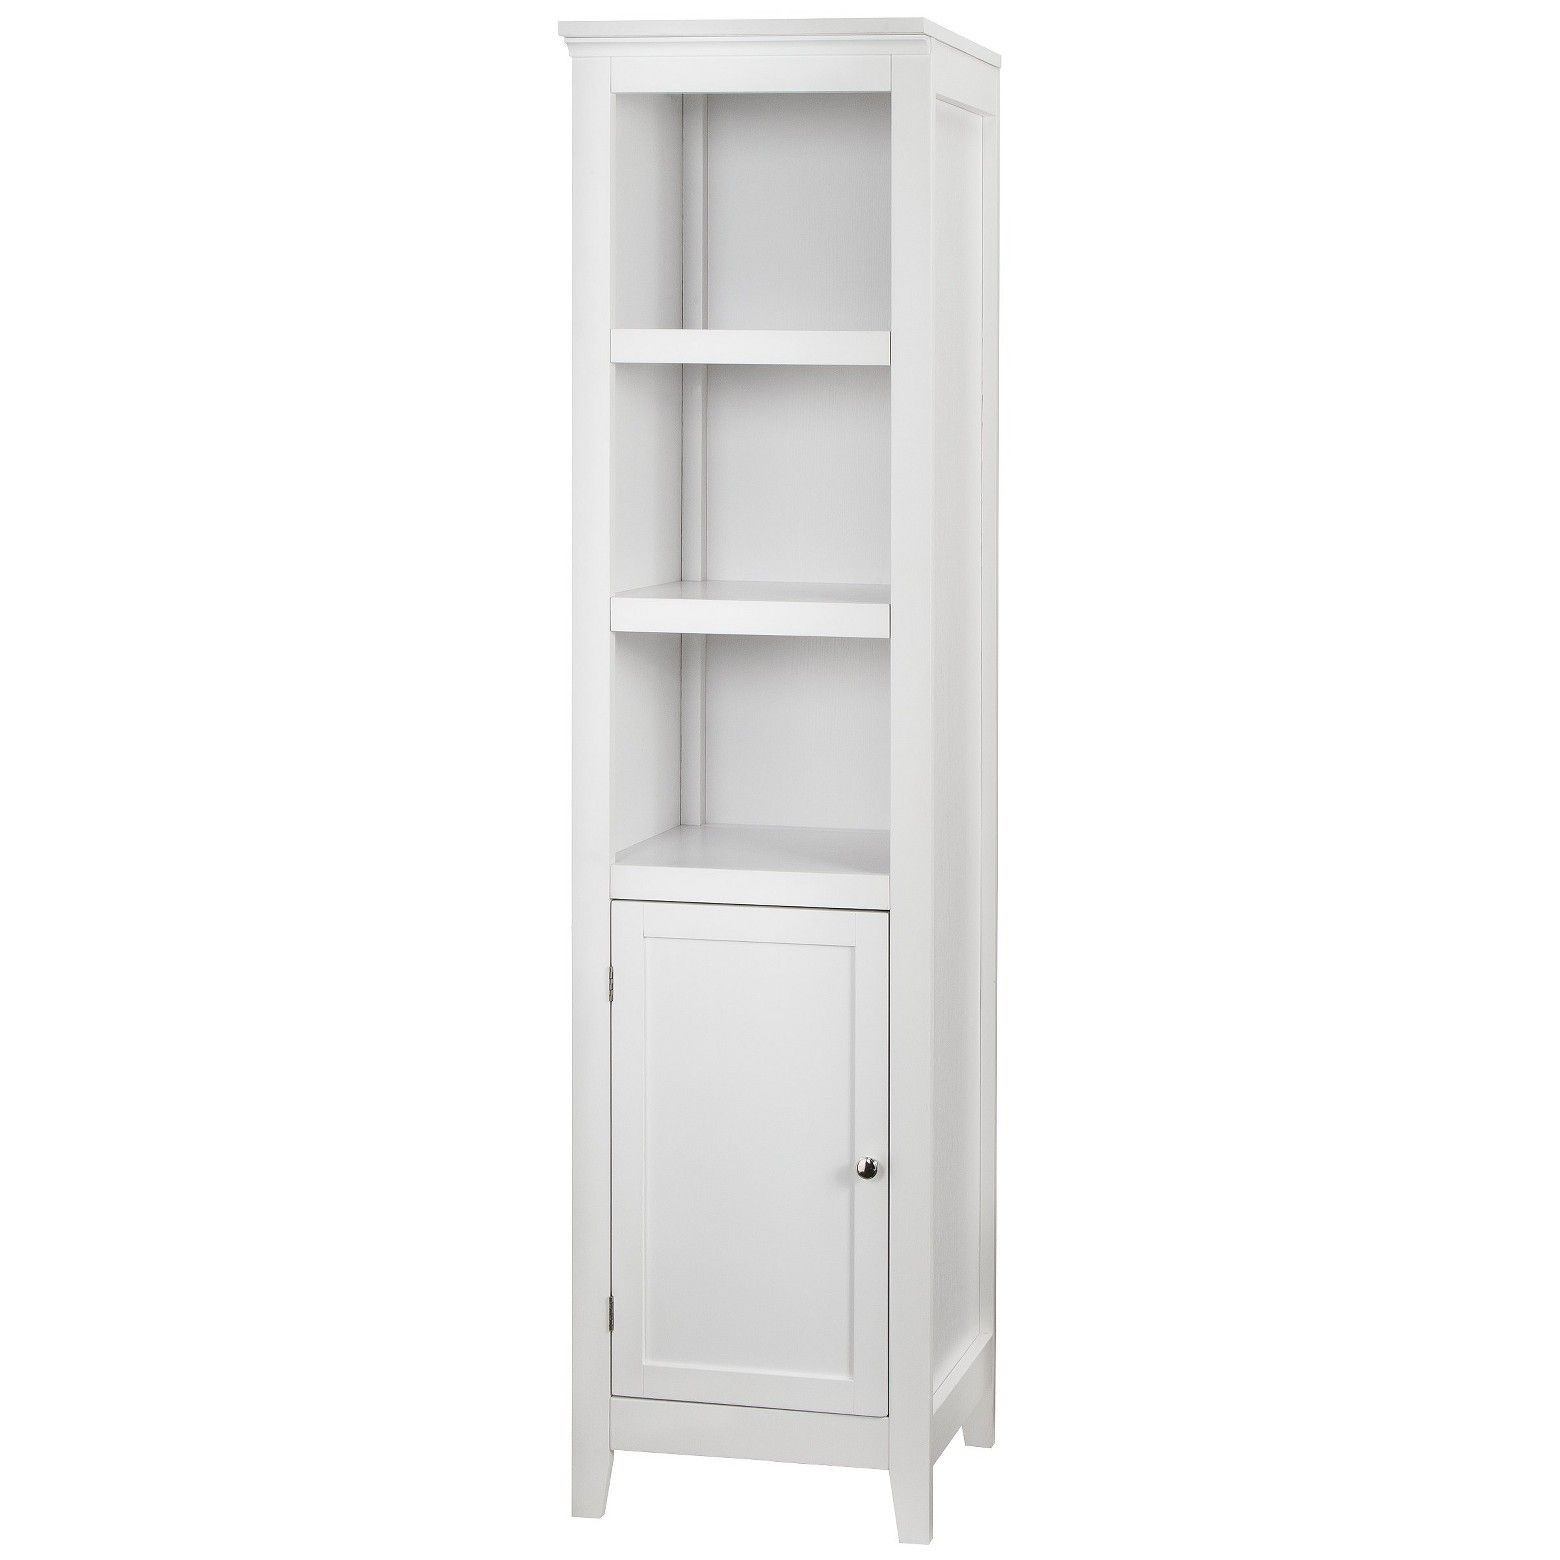 Target threshold tm carson narrow bookcase with storage for bathroom